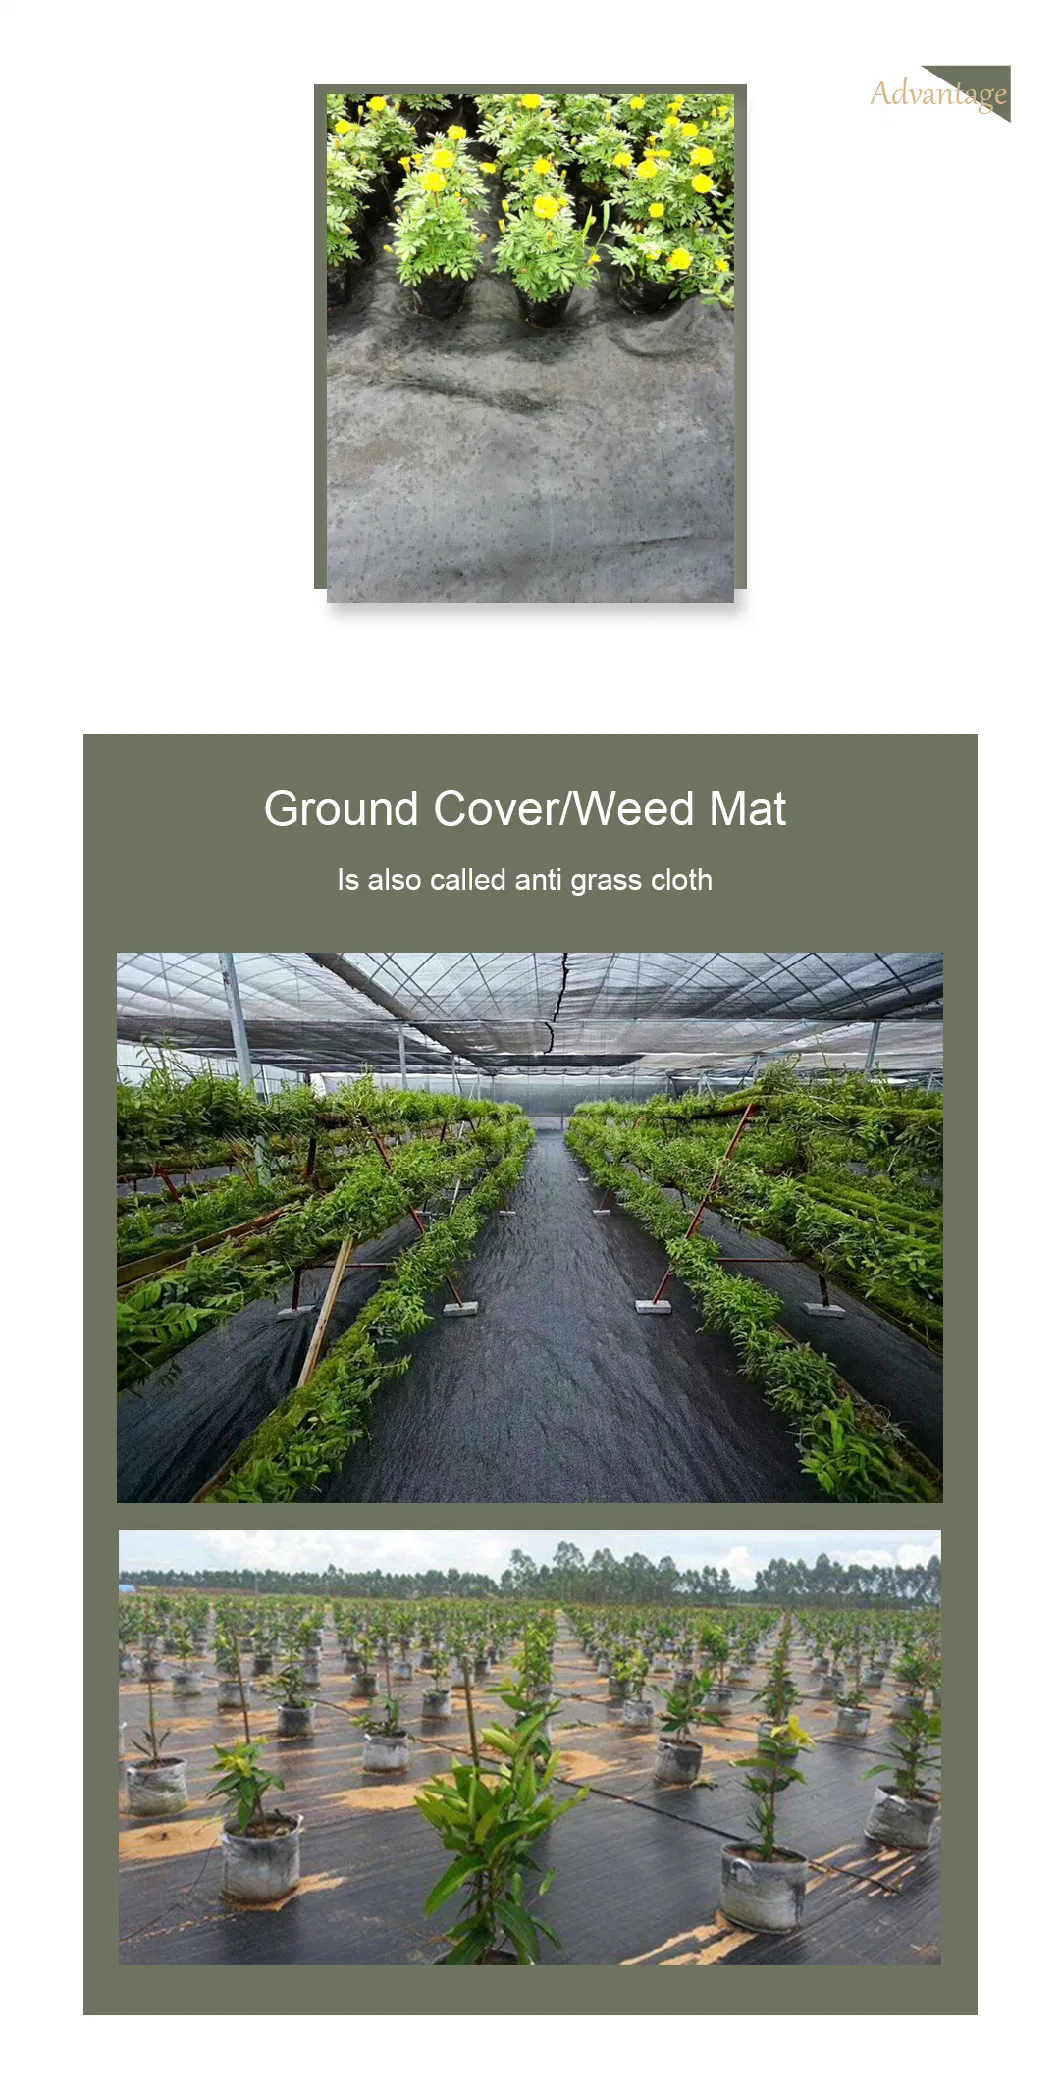 Ground Cover Weed Control Fabric/ PP Woven Fabric/ PP Woven Geotextile